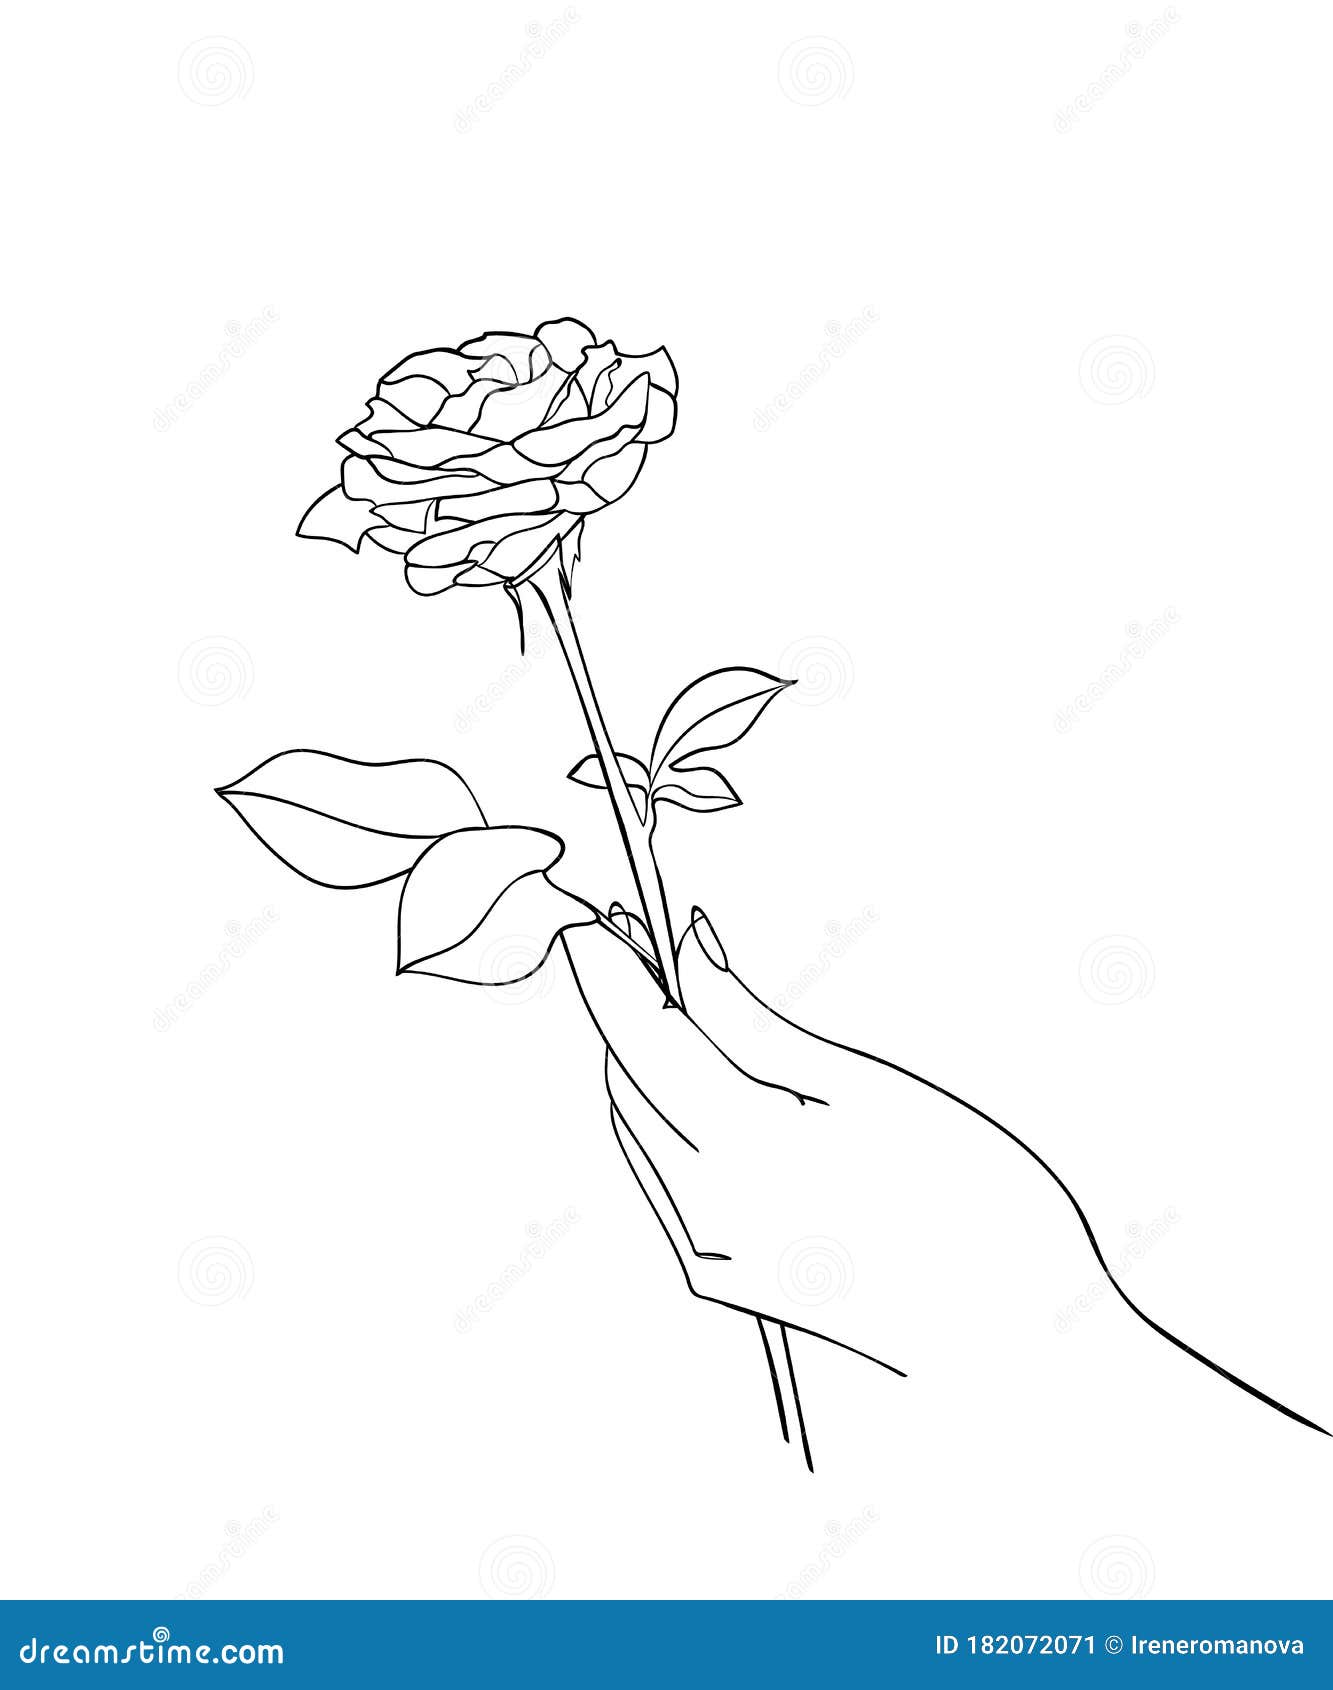 Roses Line Drawing - Set Of Sketches, Hand Drawn Rose, Line Art. Vector